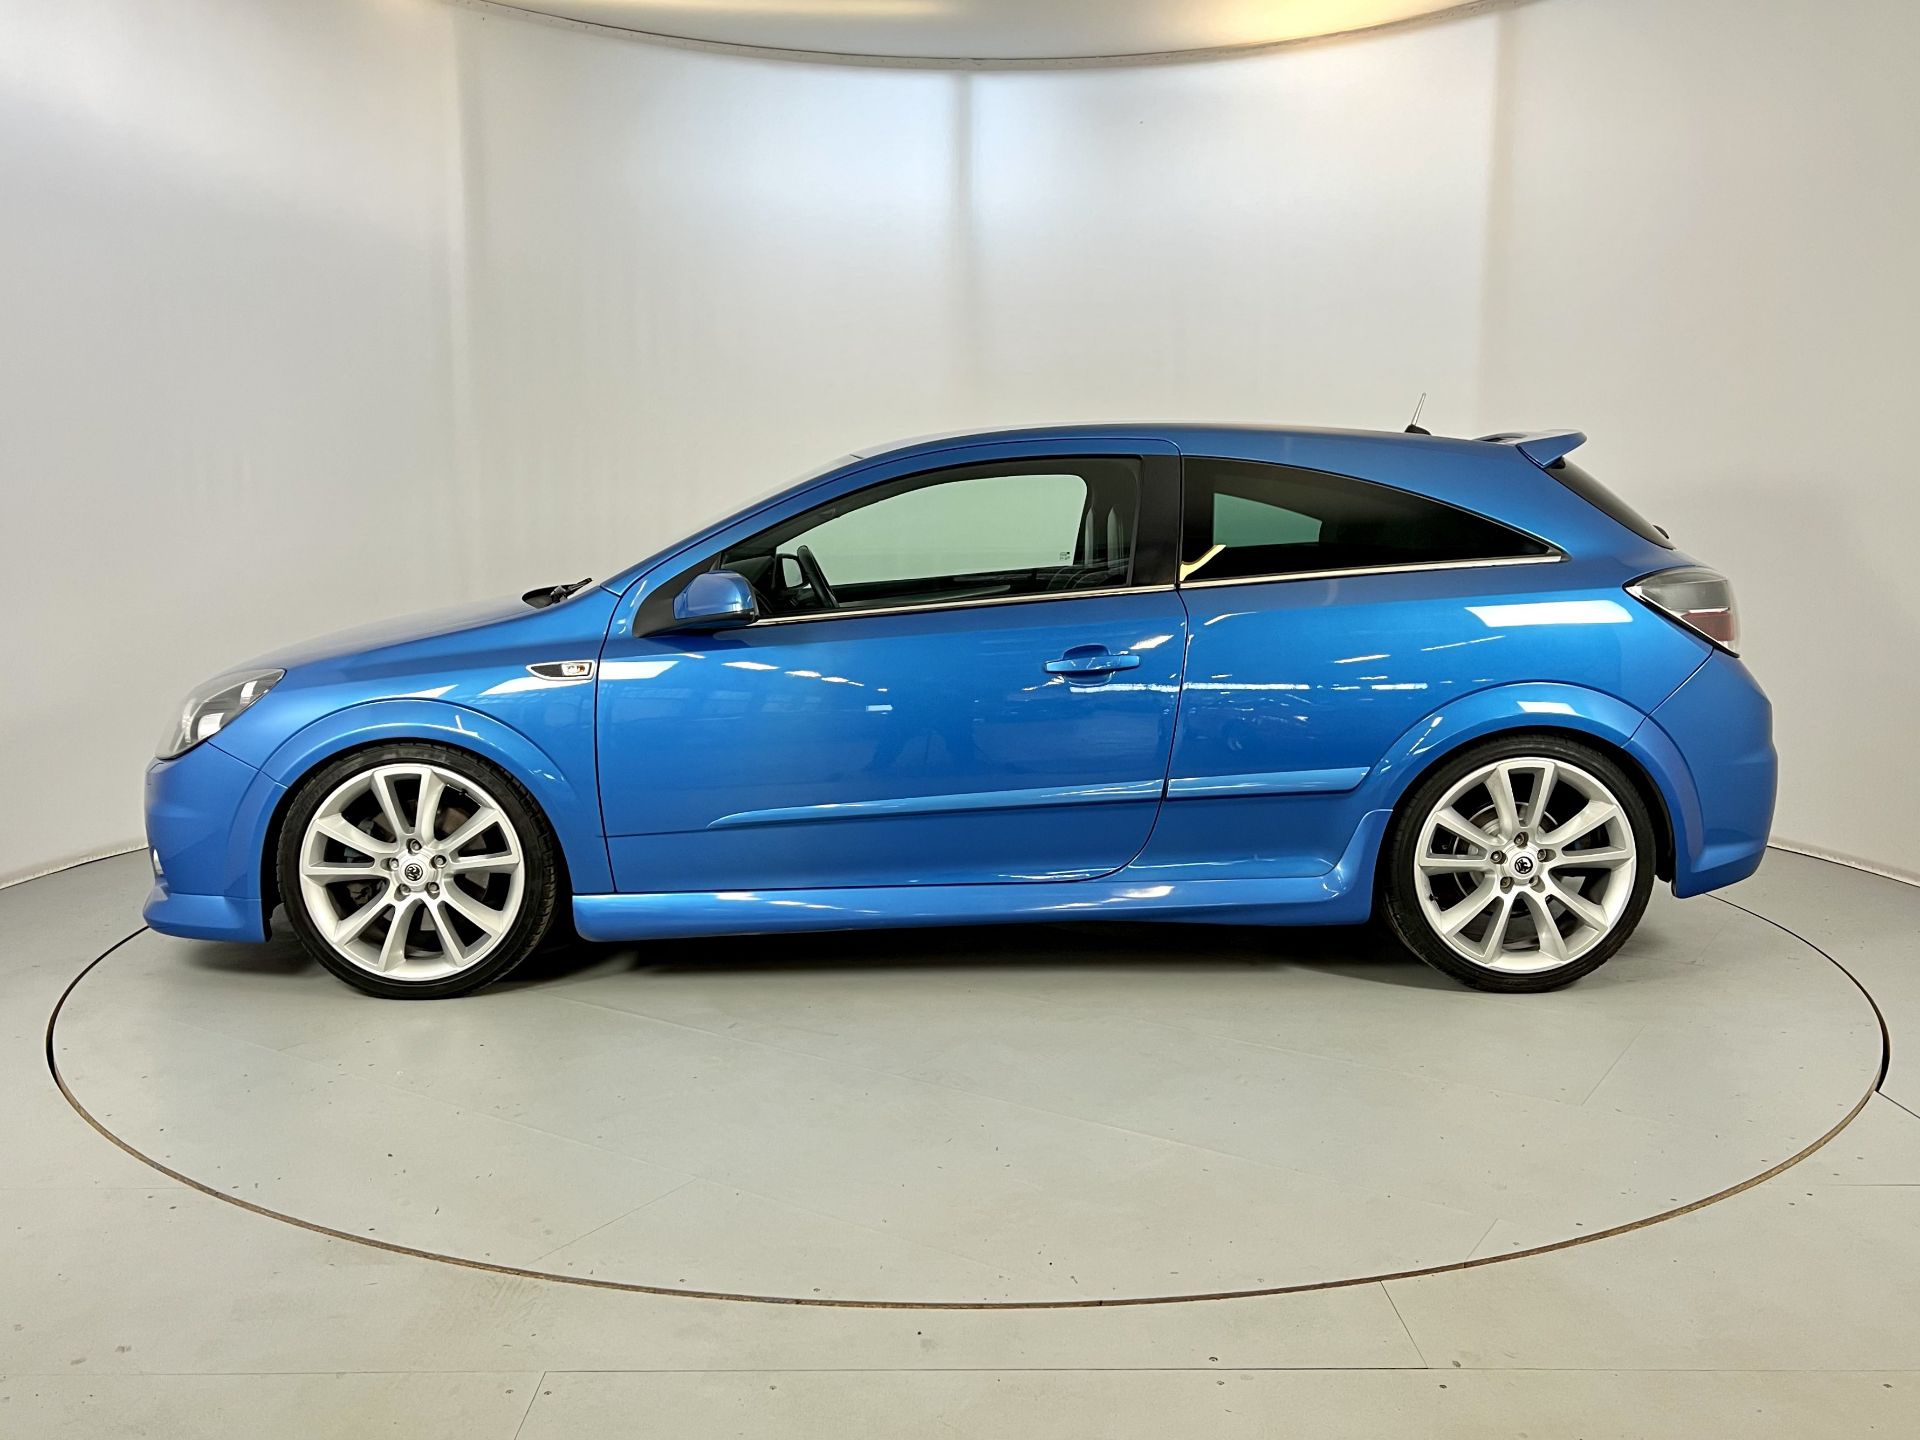 Vauxhall Astra VXR - Image 5 of 30